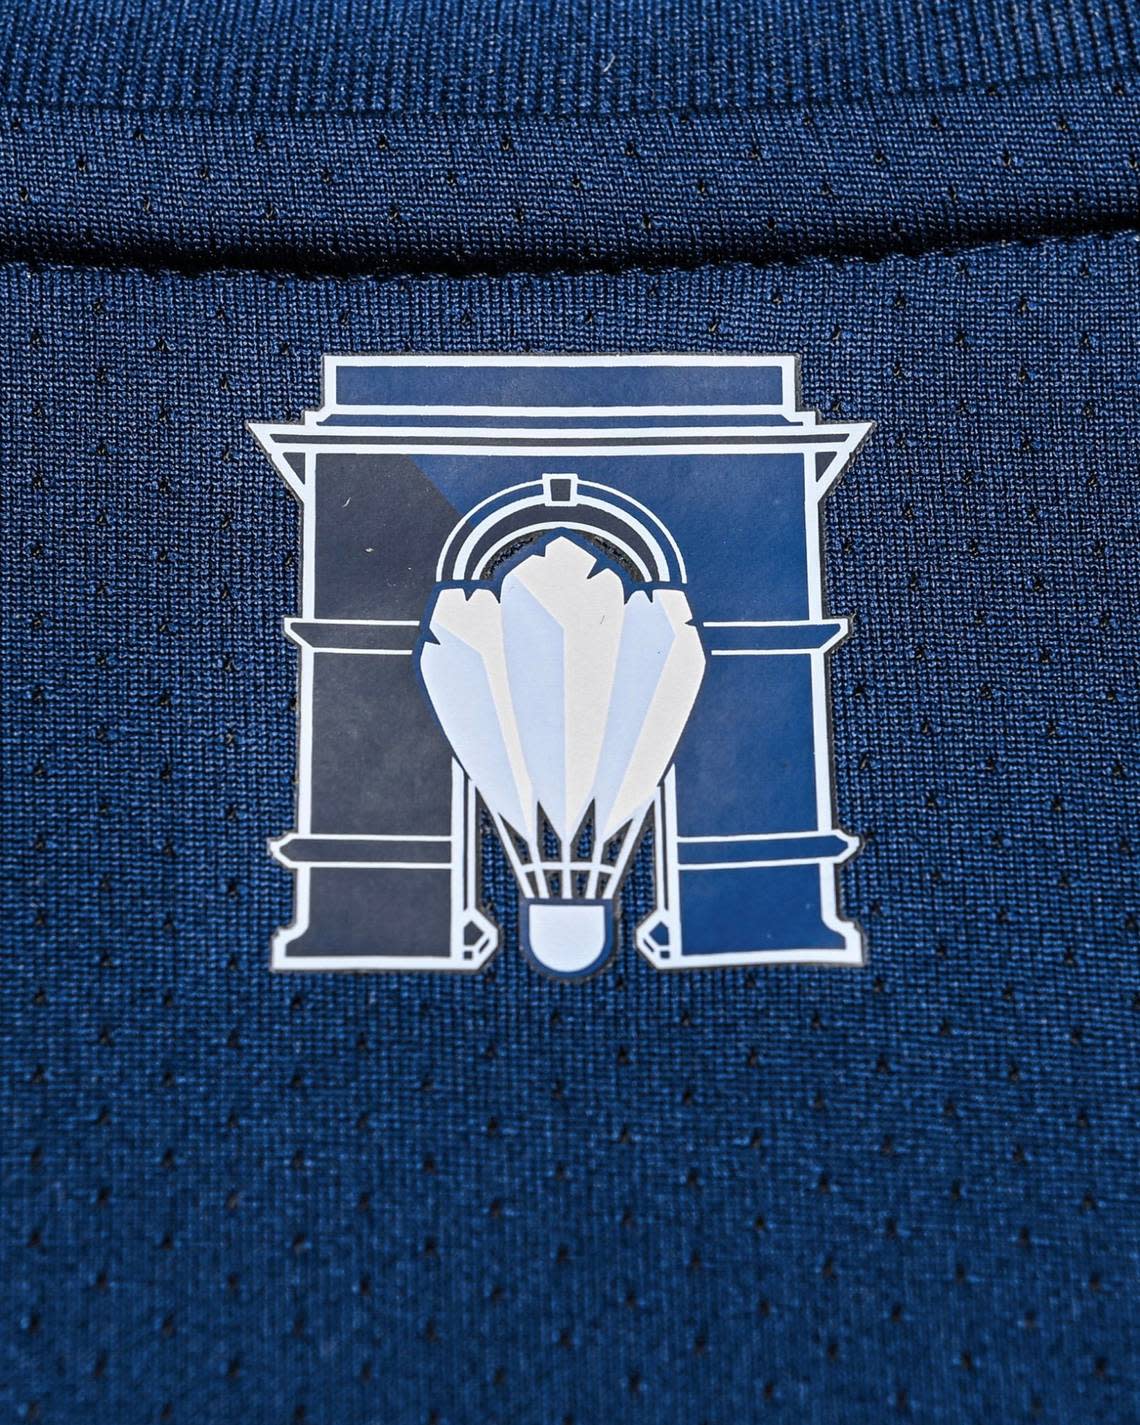 The shuttlecock sculpture/Rosedale Memorial Arch icon on Sporting KC’s state line jerseys.